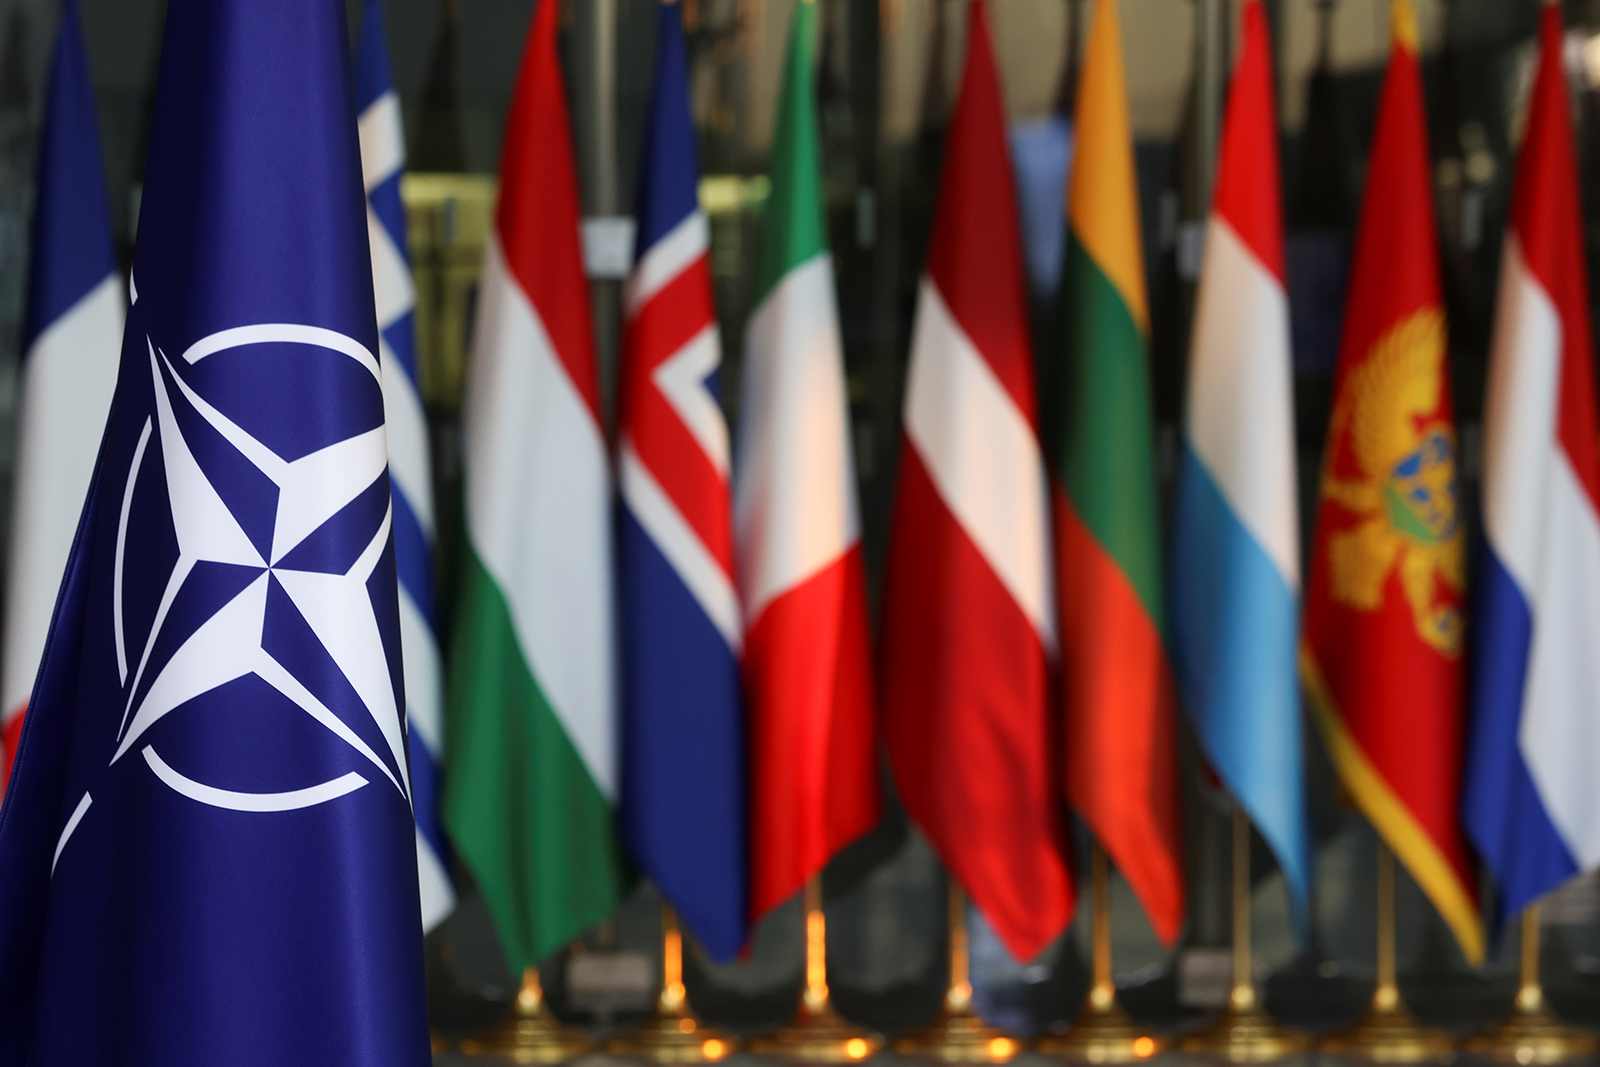 National flags of NATO members are seen at the alliance's headquarters in Brussels on March 4.